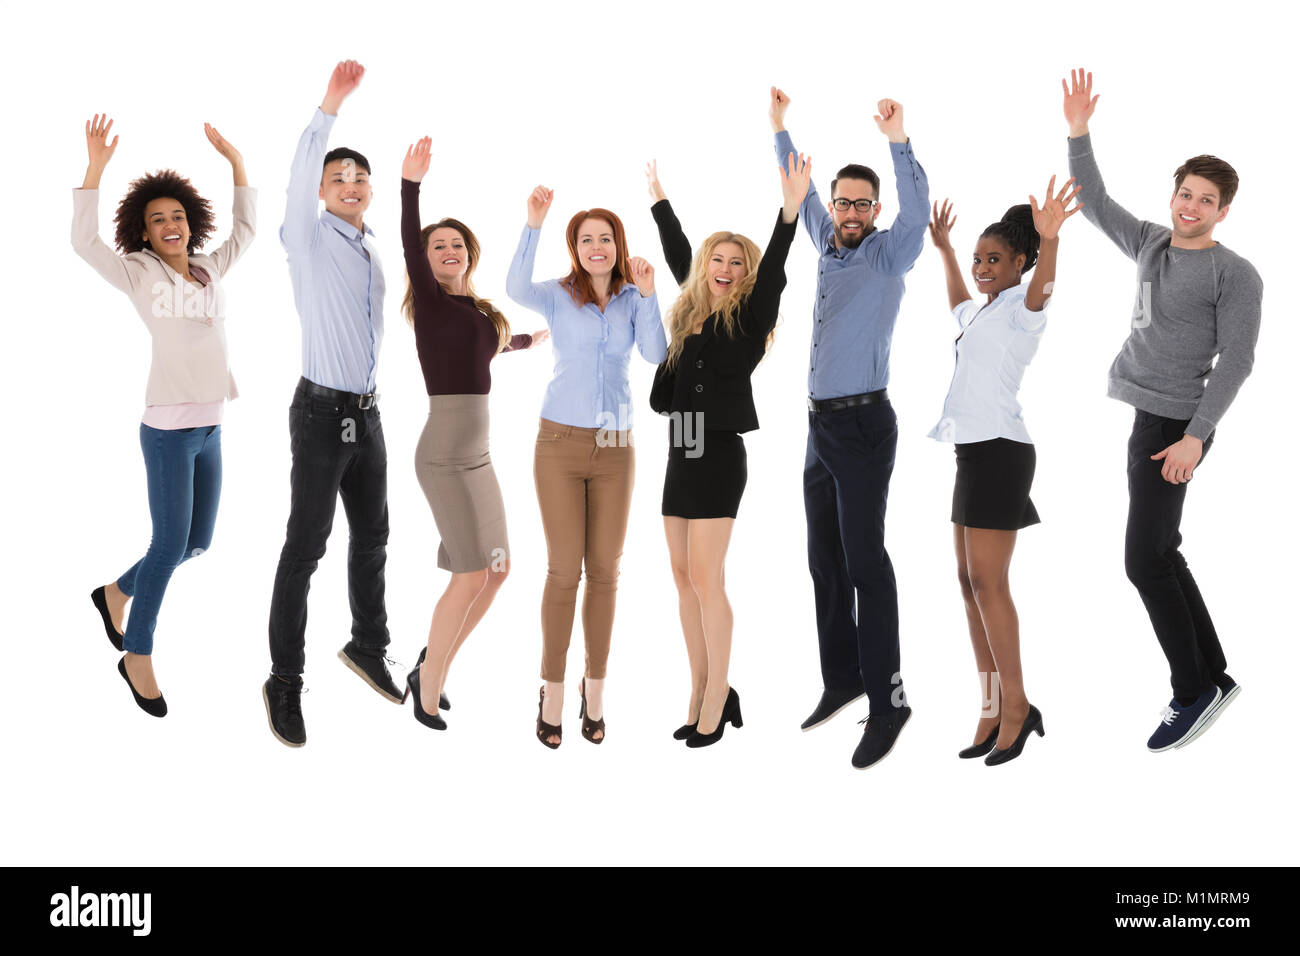 Portrait Of Excited College Students Raising Their Arms Over White Background Stock Photo